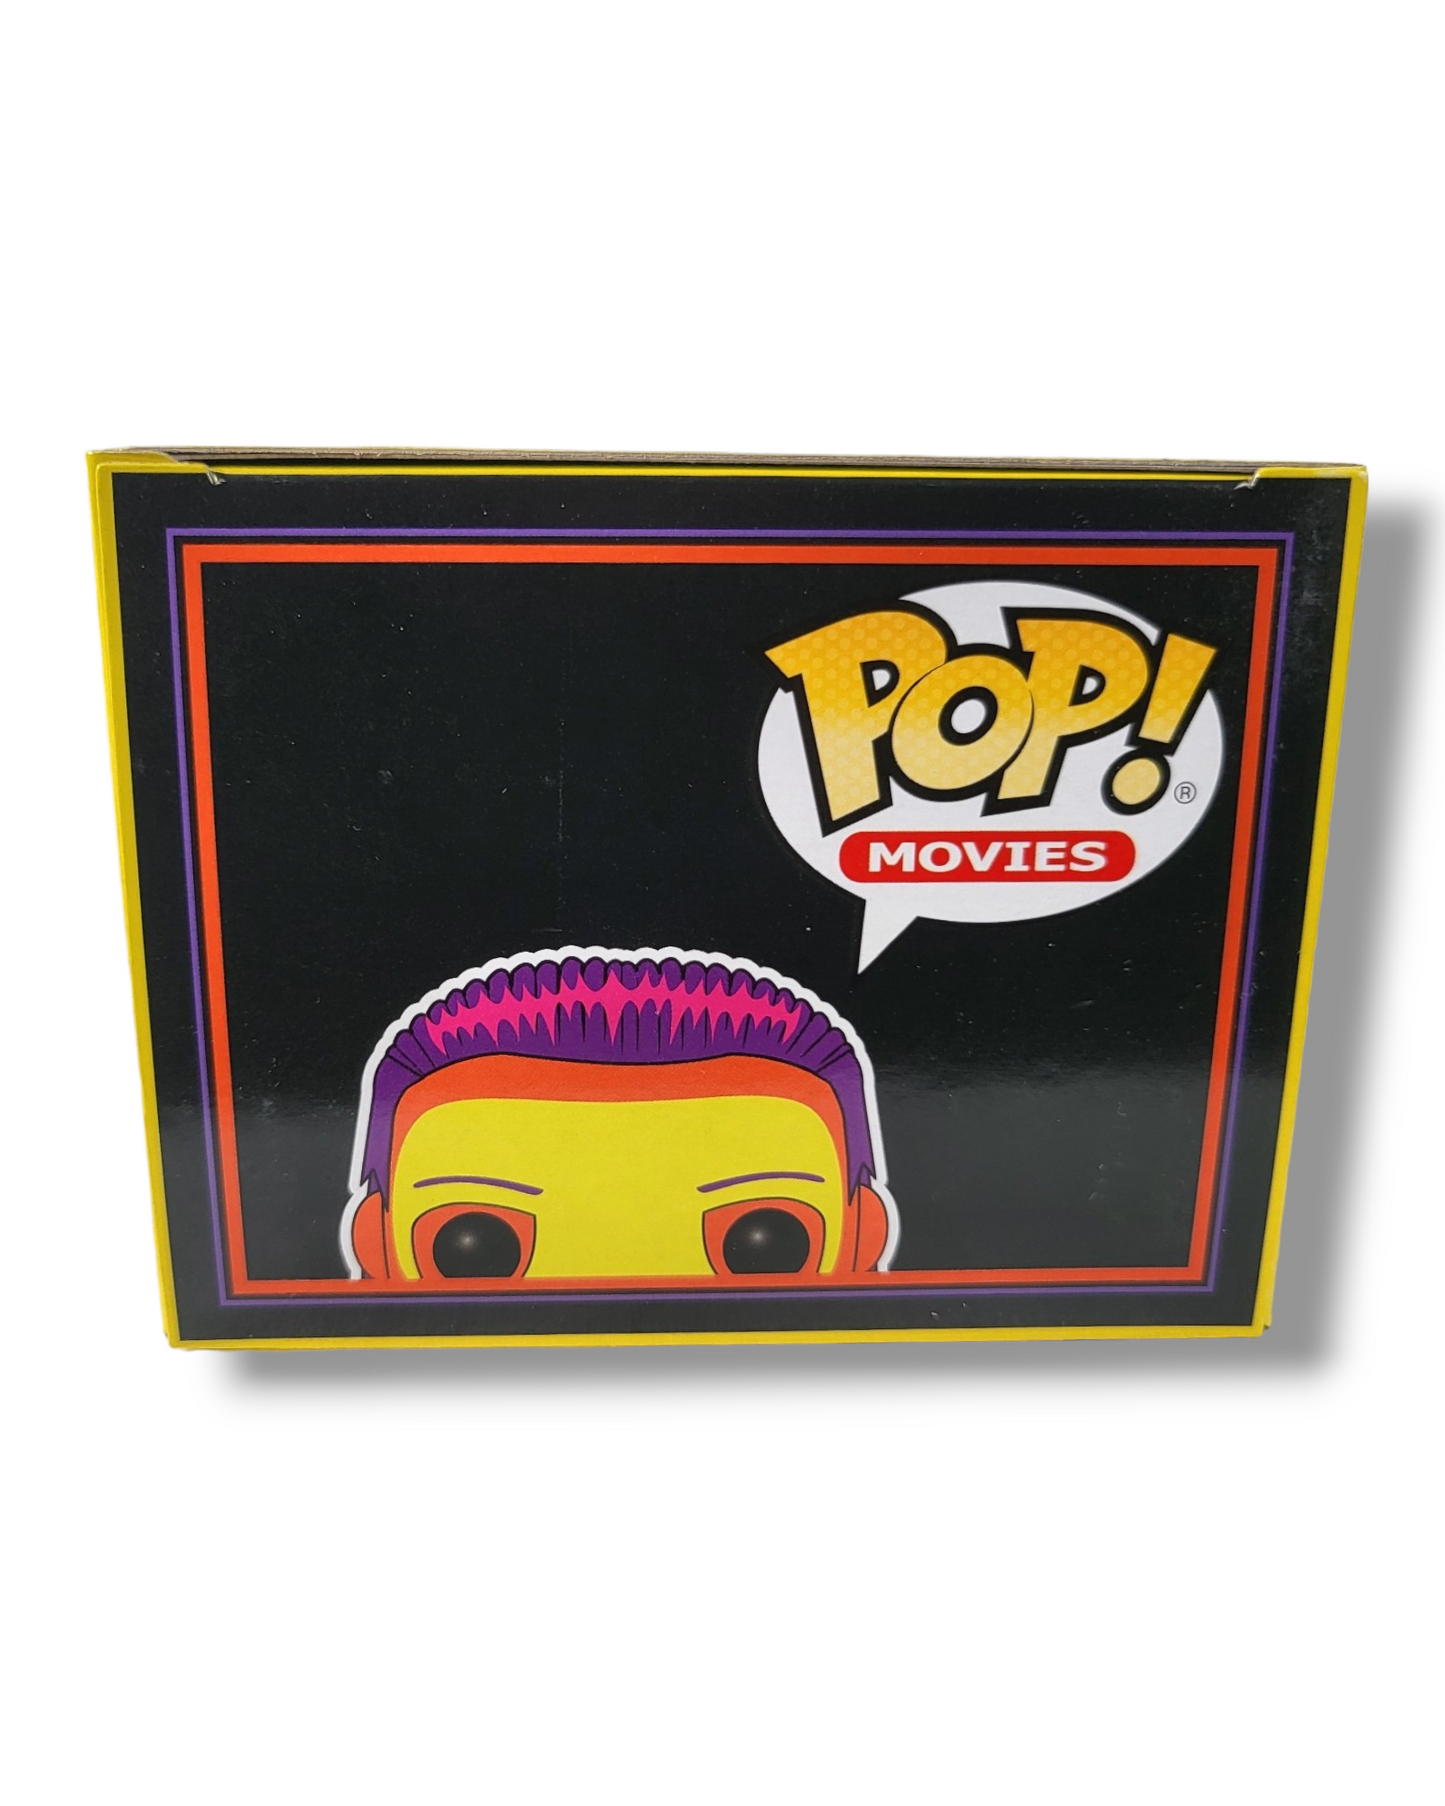 Horrifyingly Iconic: Michael Myers POP Movies Collectible from Halloween 03 - Ricky's Garage